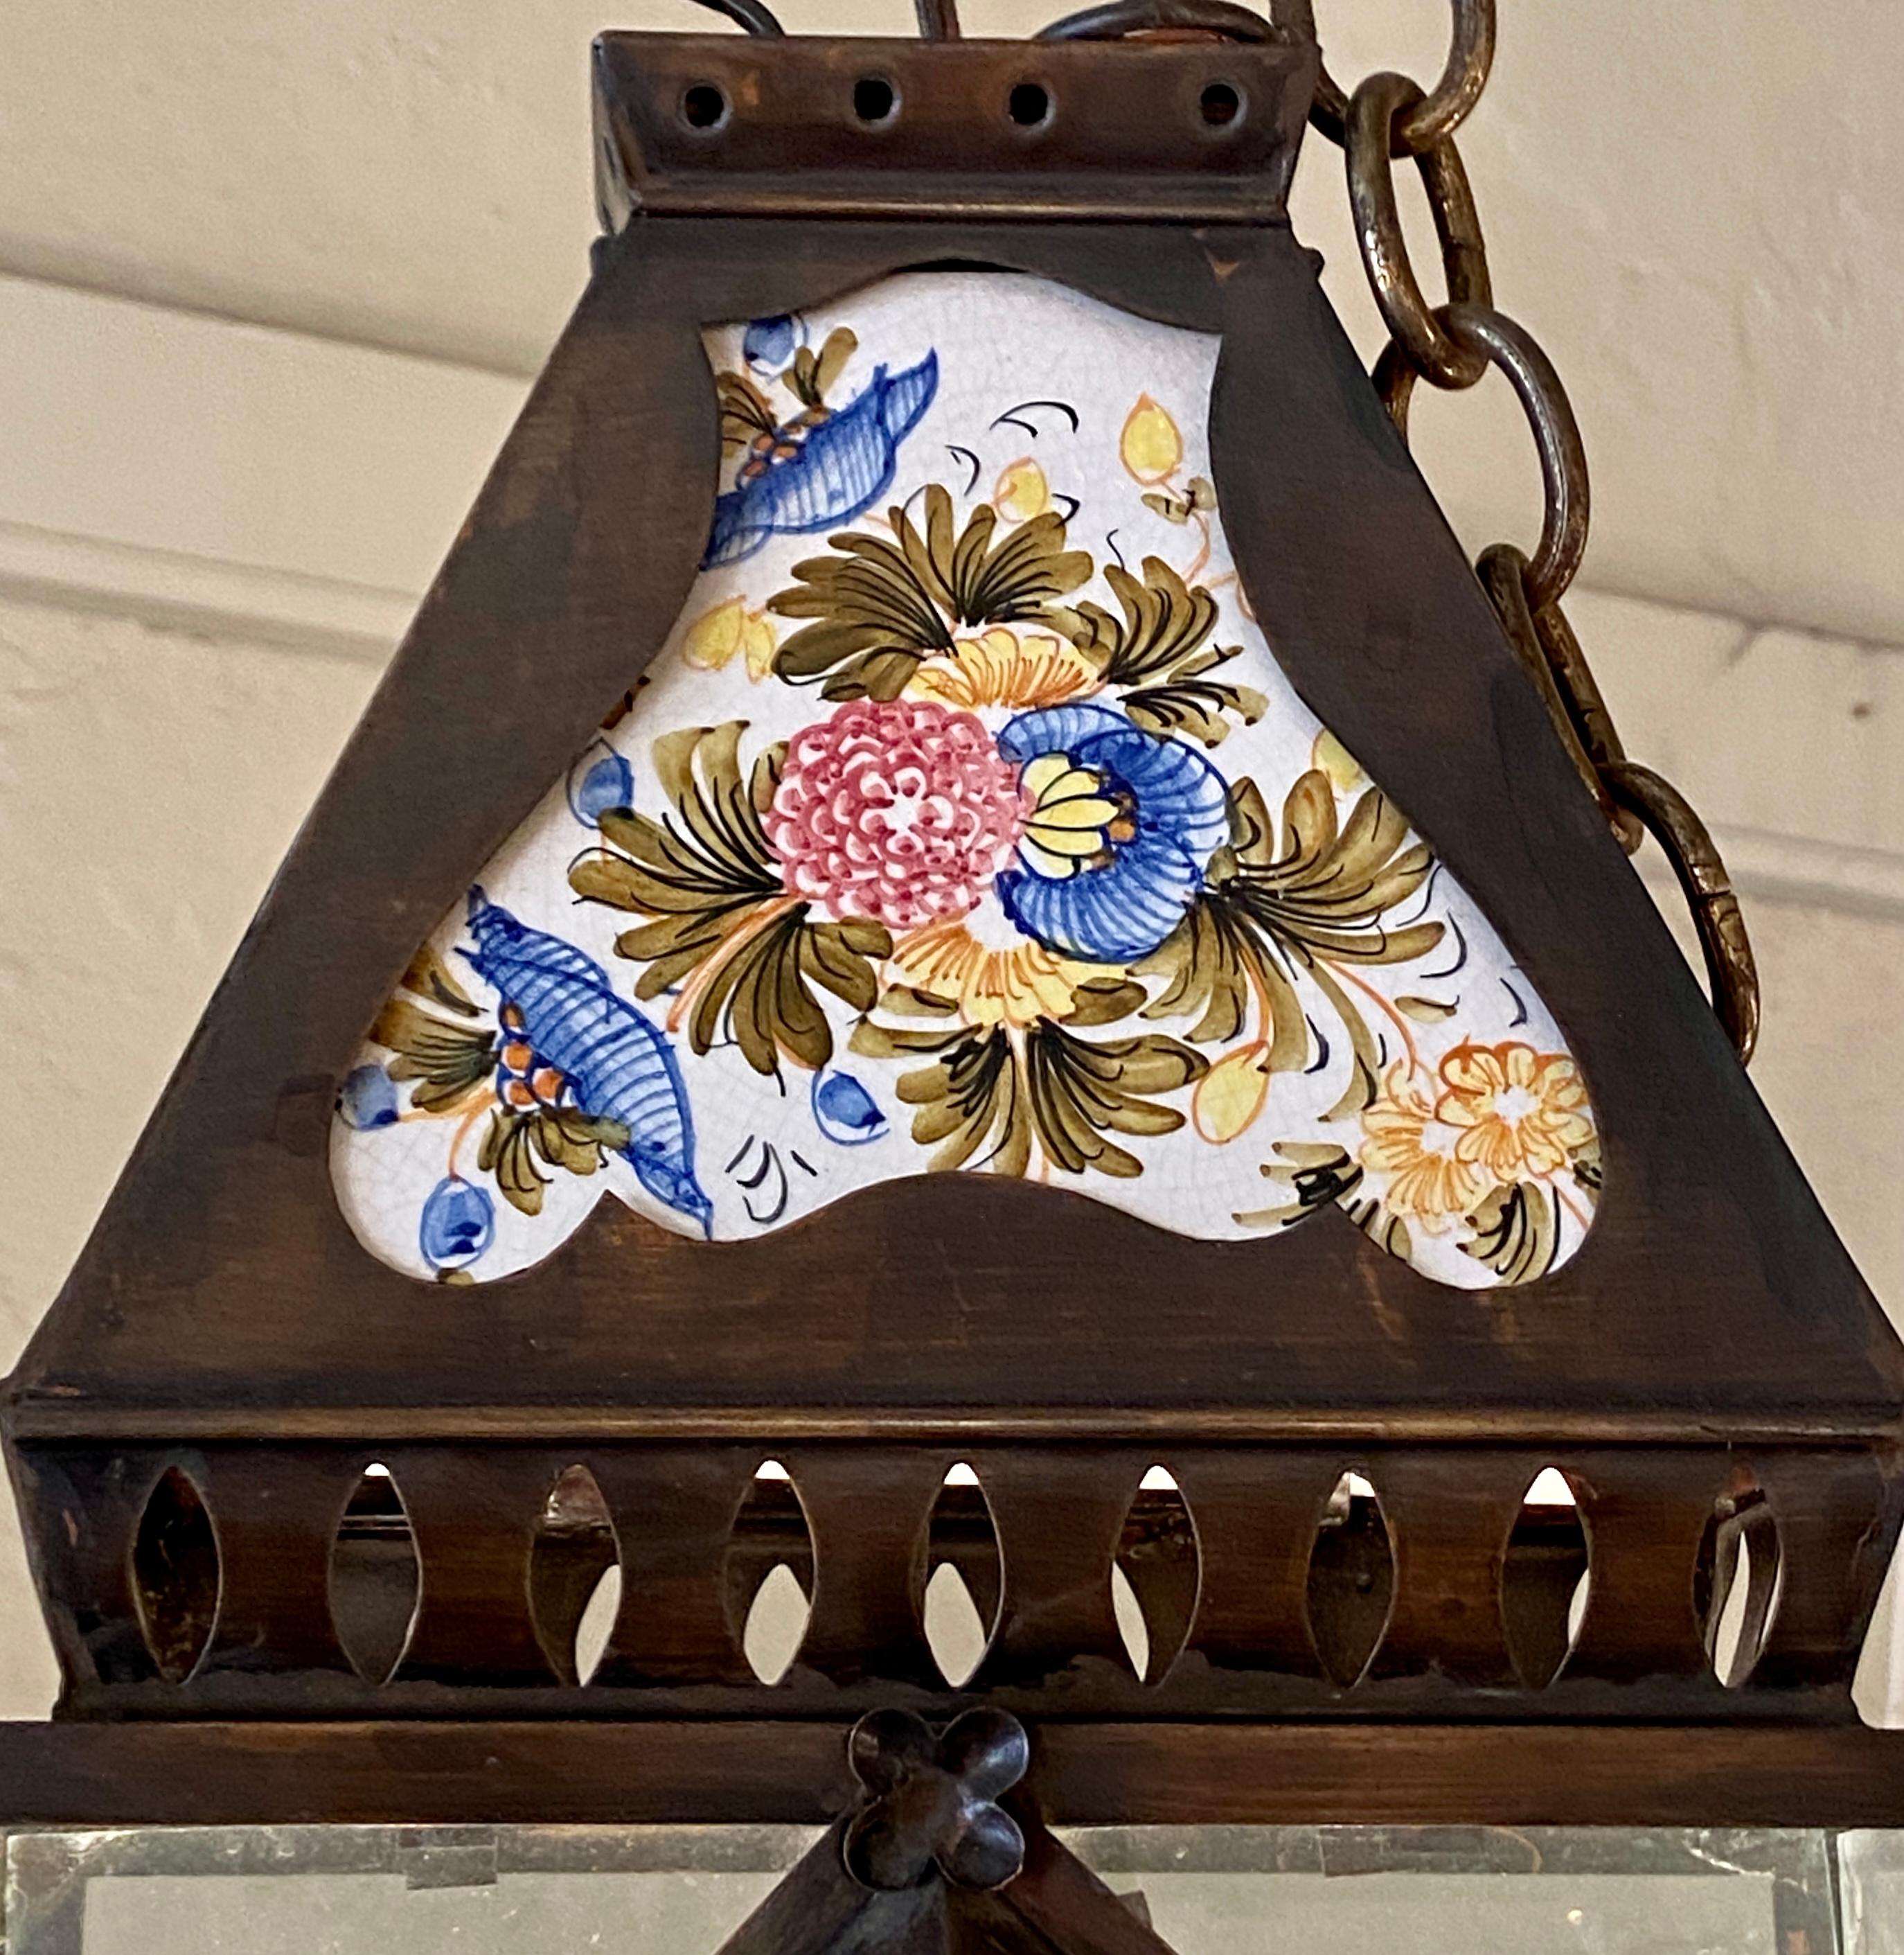 Estate Hand-Made Italian Porcelain-Mounted Copper Lantern. This is a sweet petite vintage lantern, hand-wrought and very charming.